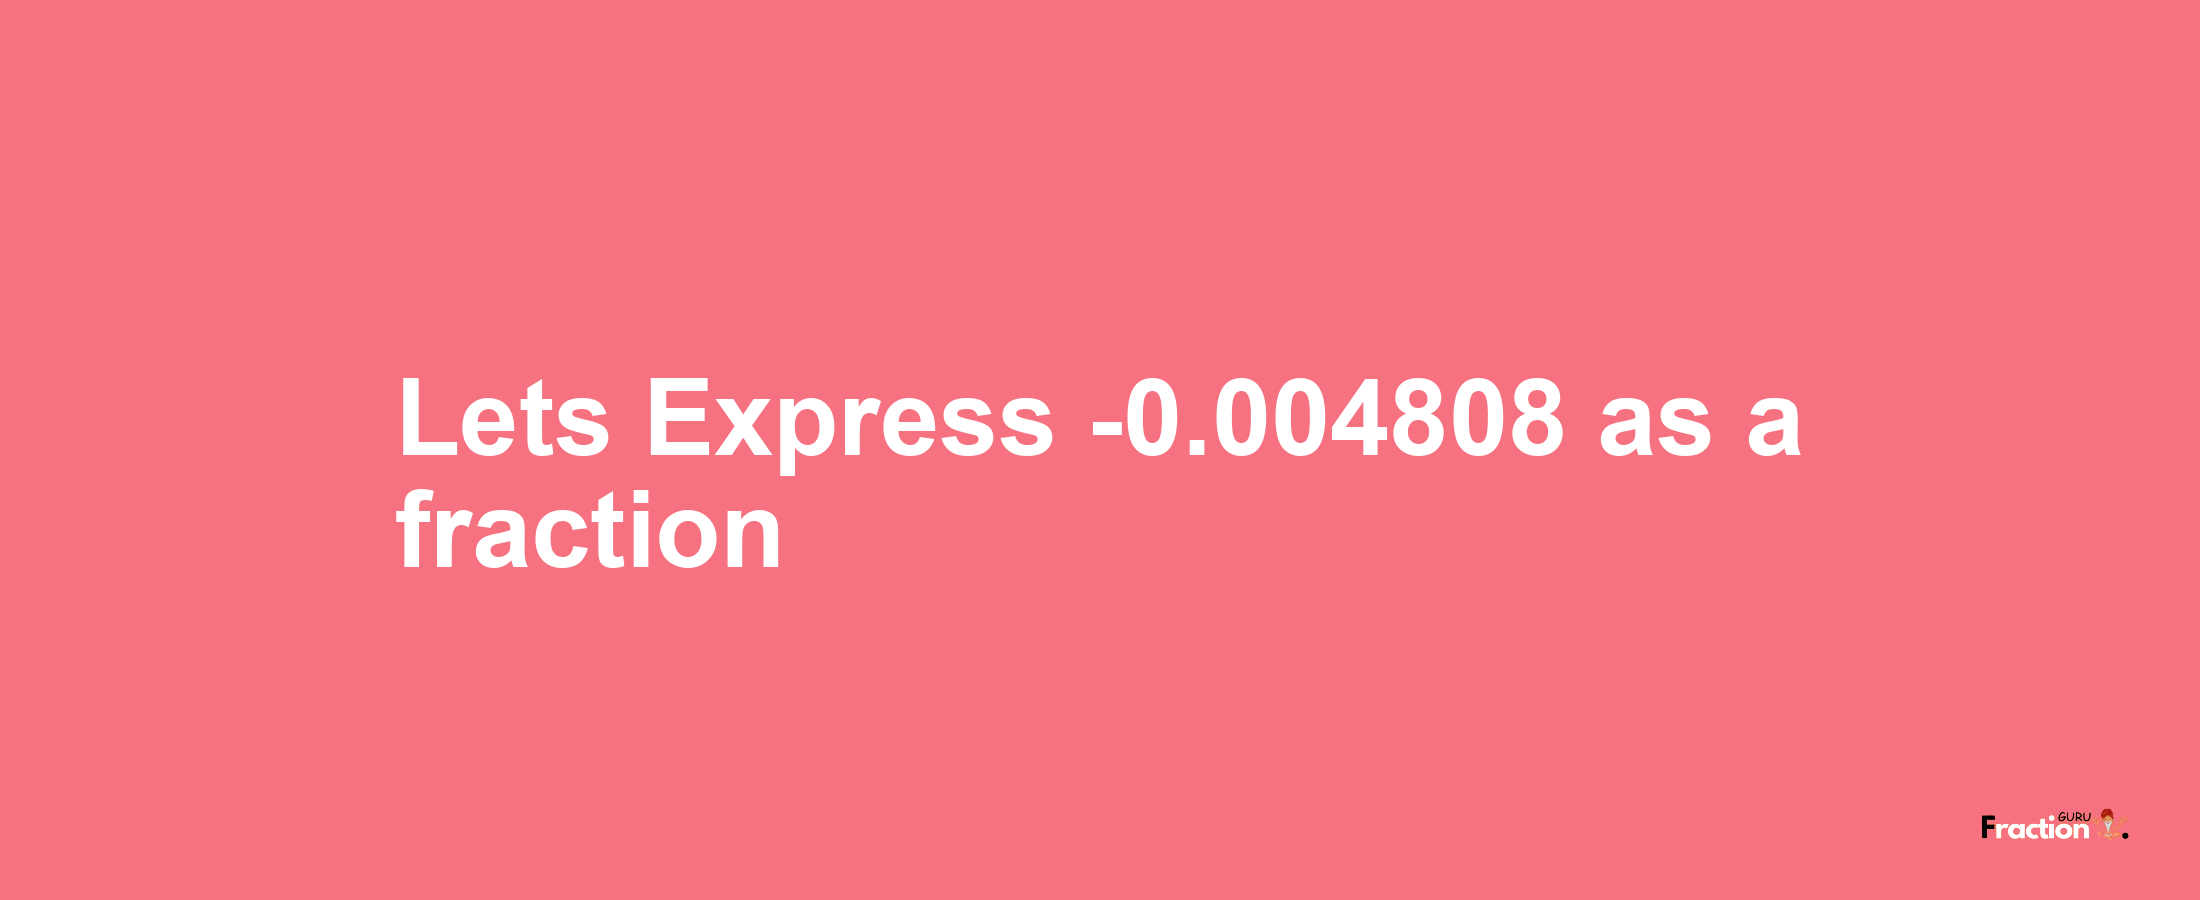 Lets Express -0.004808 as afraction